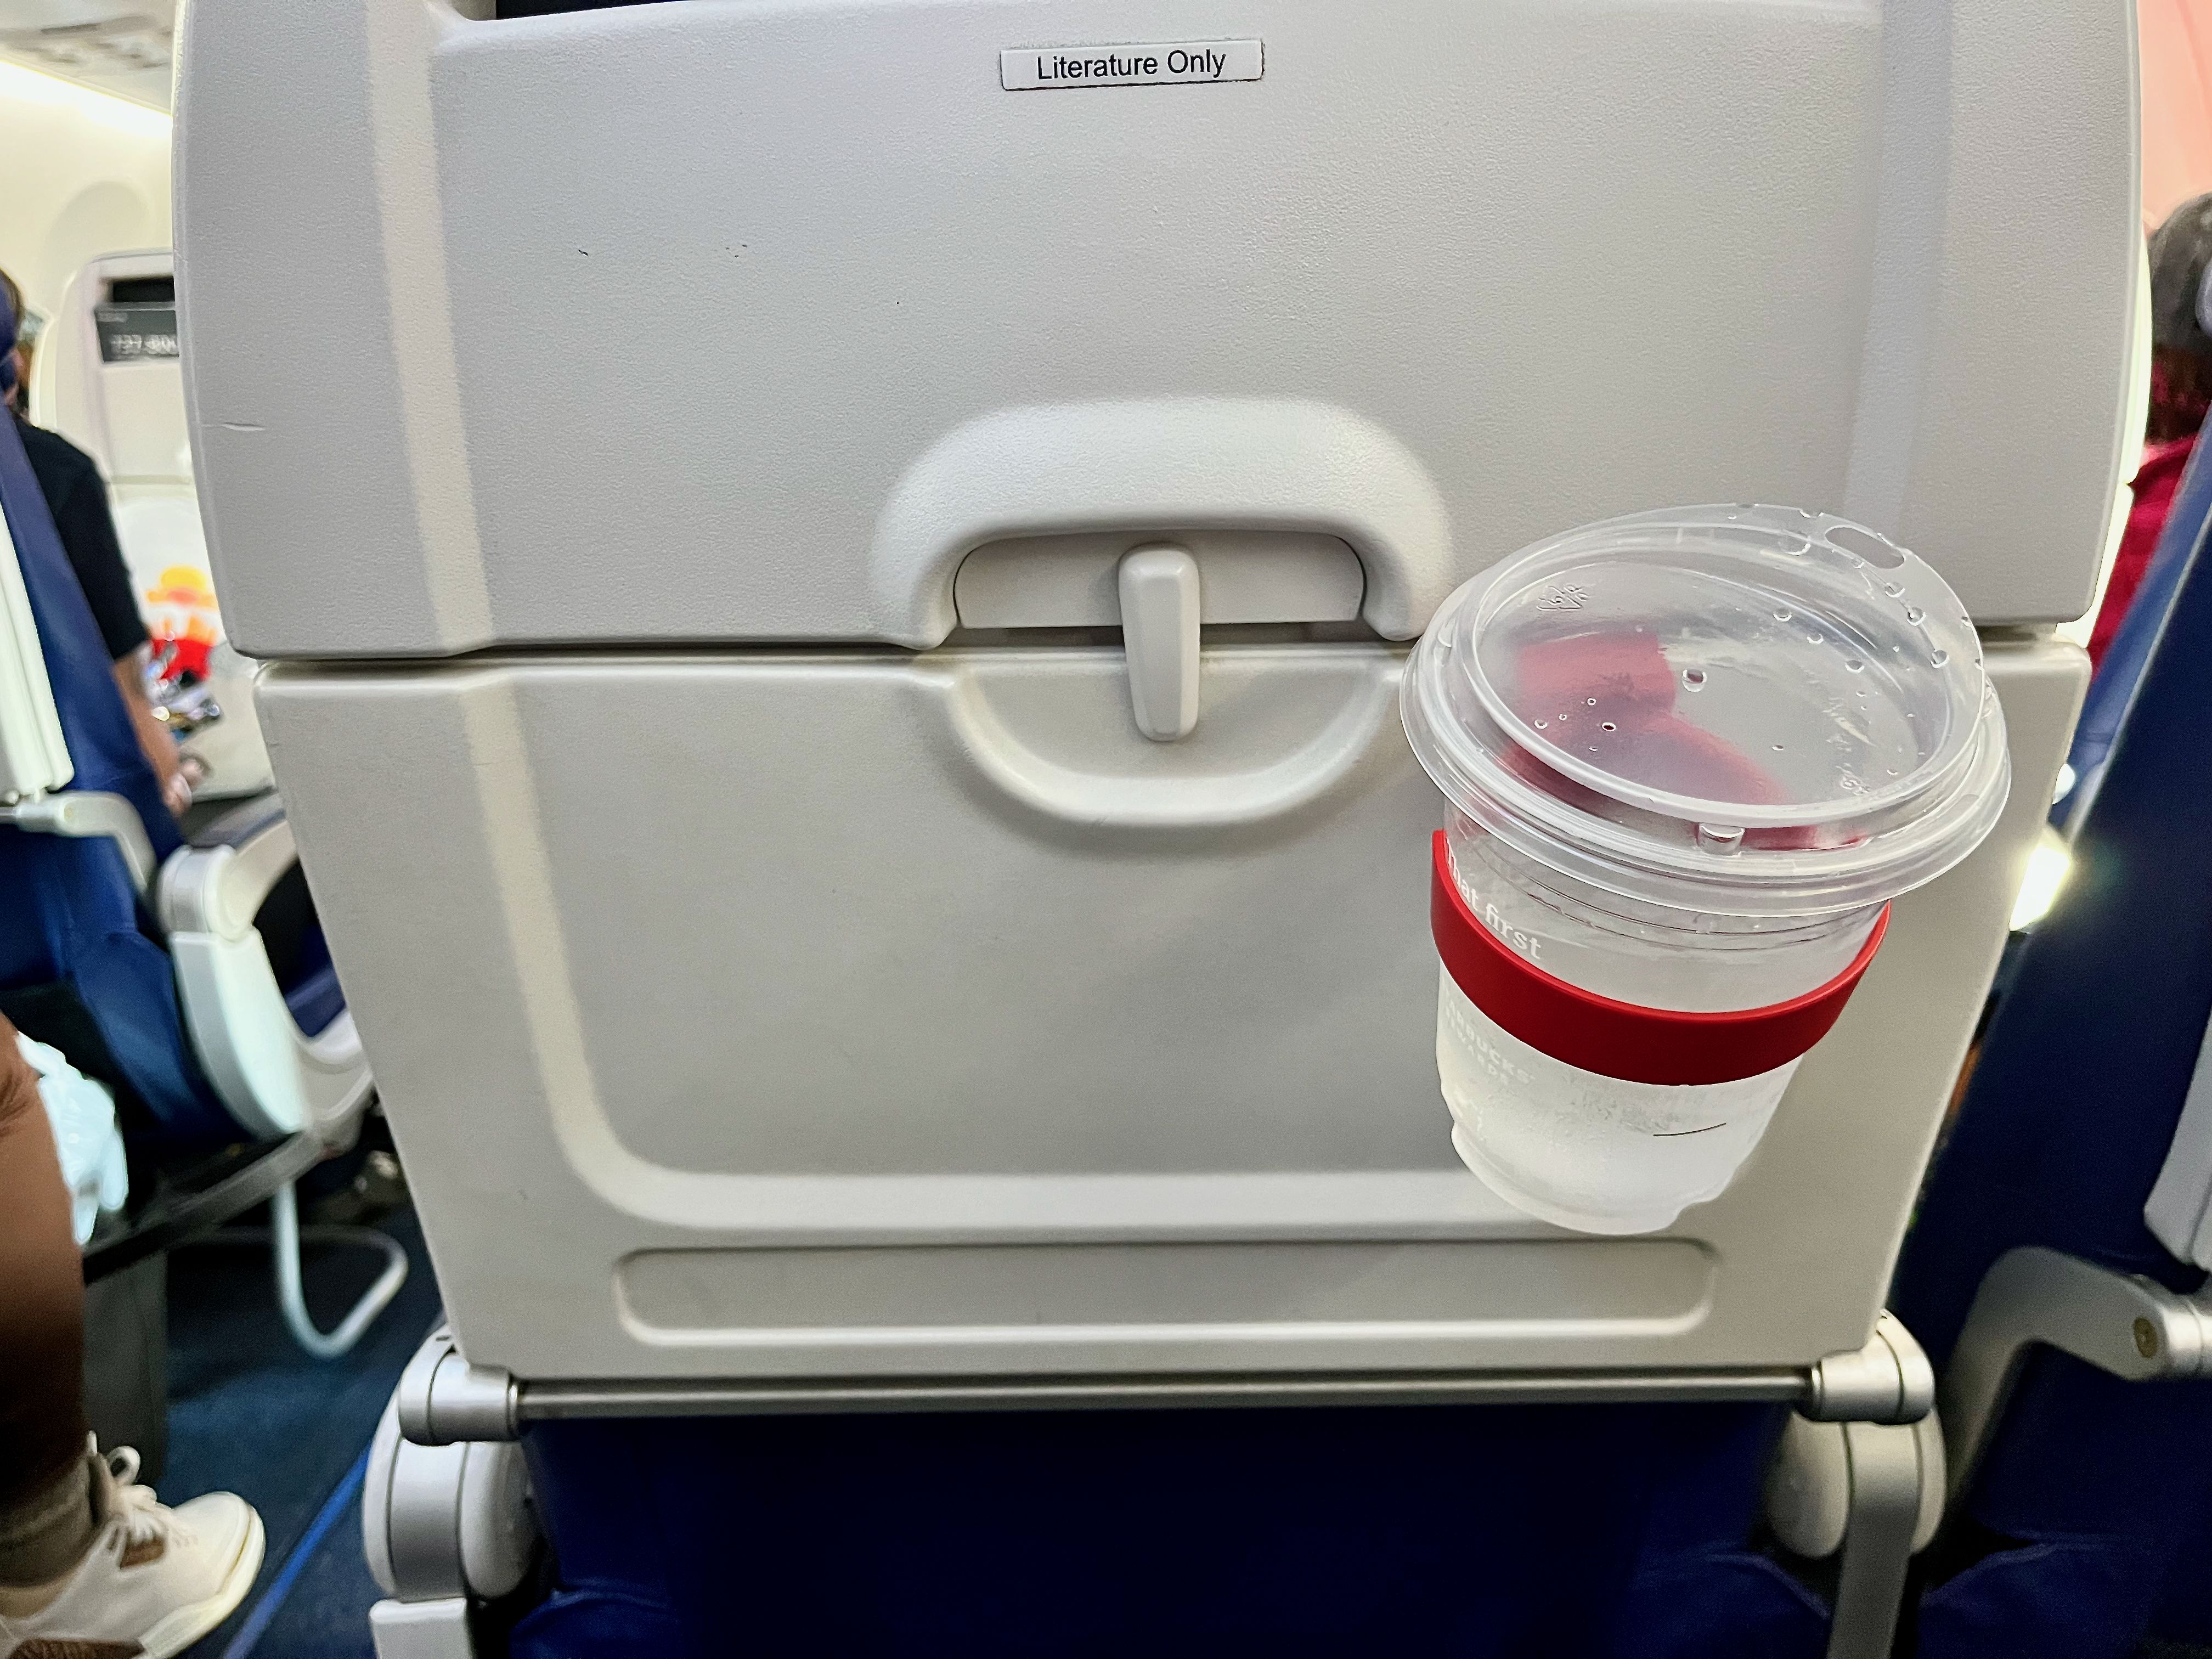 Airplane Drink Holder travel accessory provides a solution for